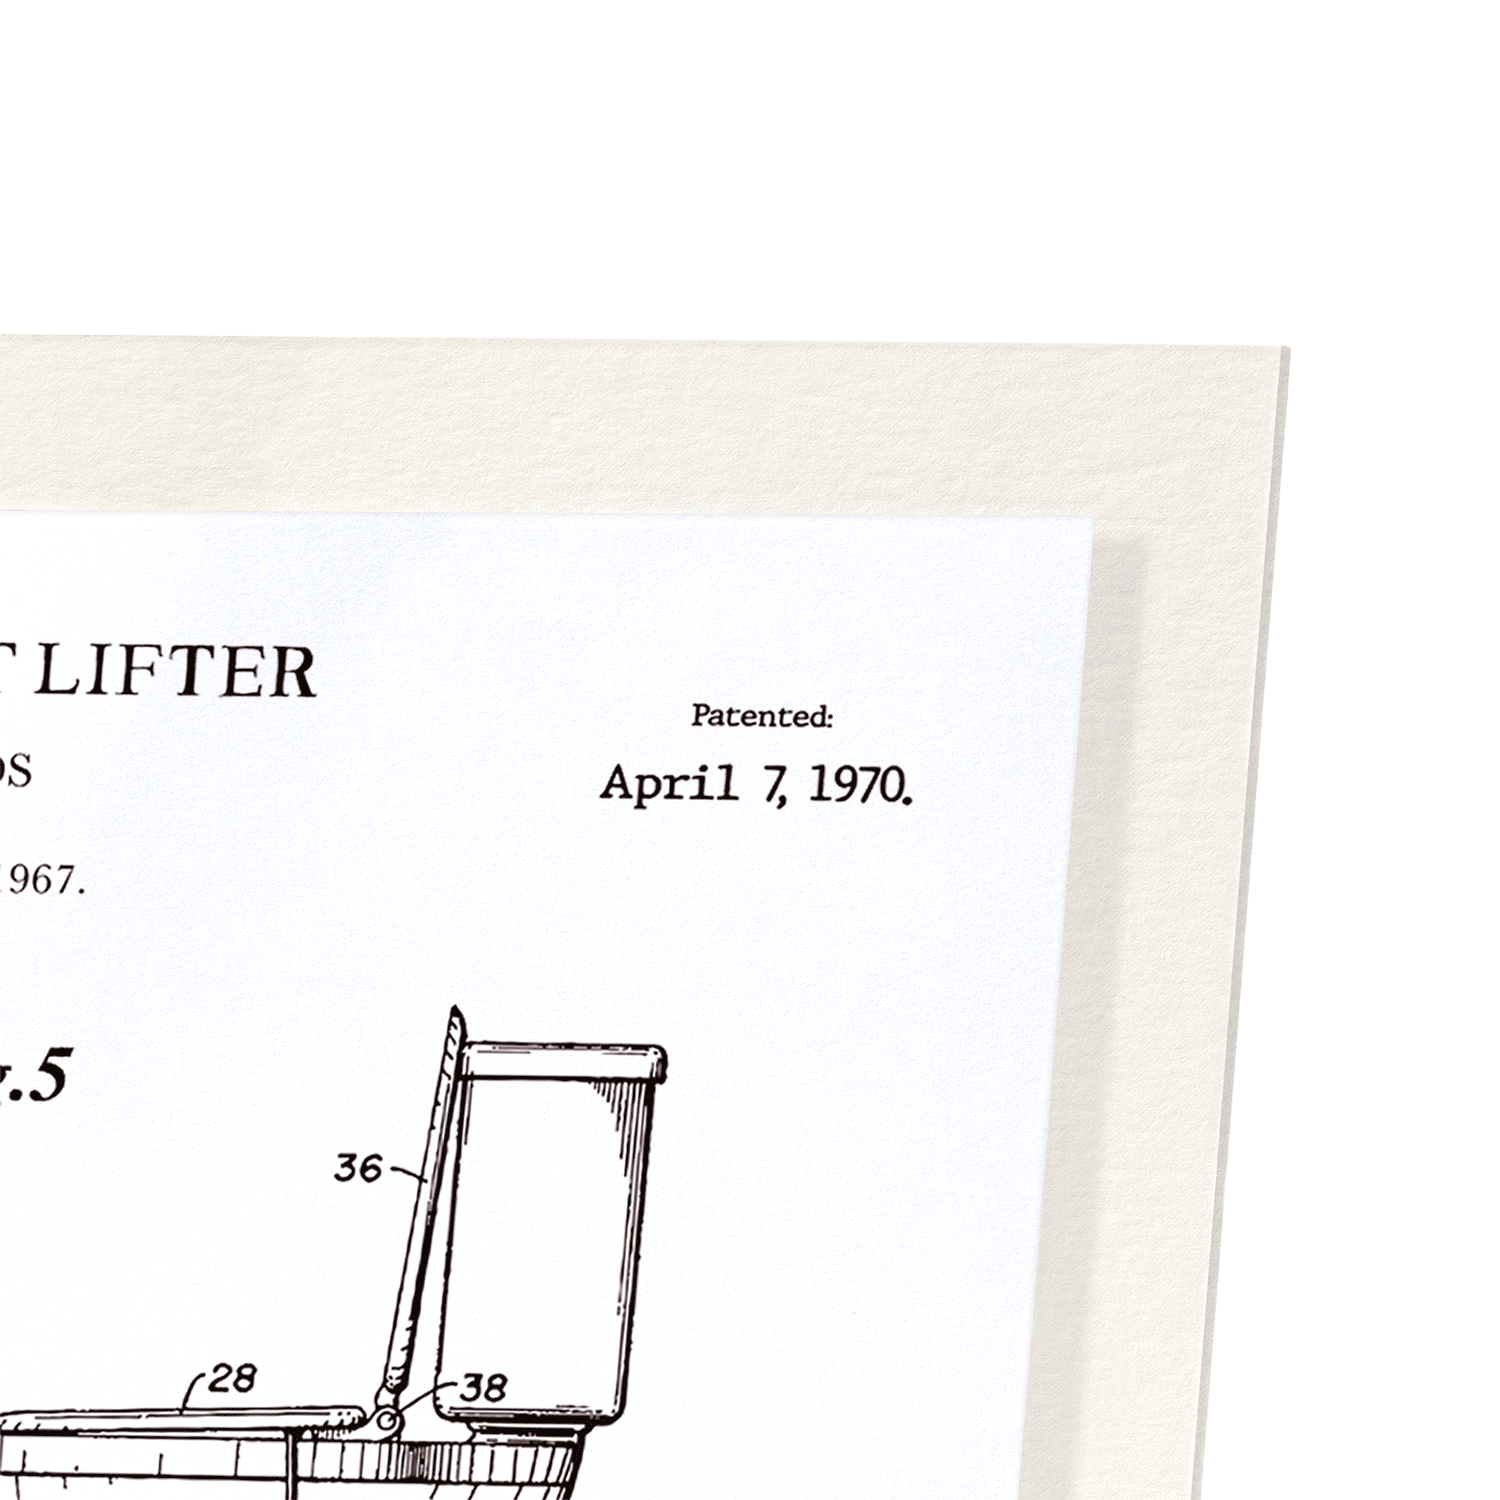 PATENT OF TOILET SEAT LIFTER (1970)